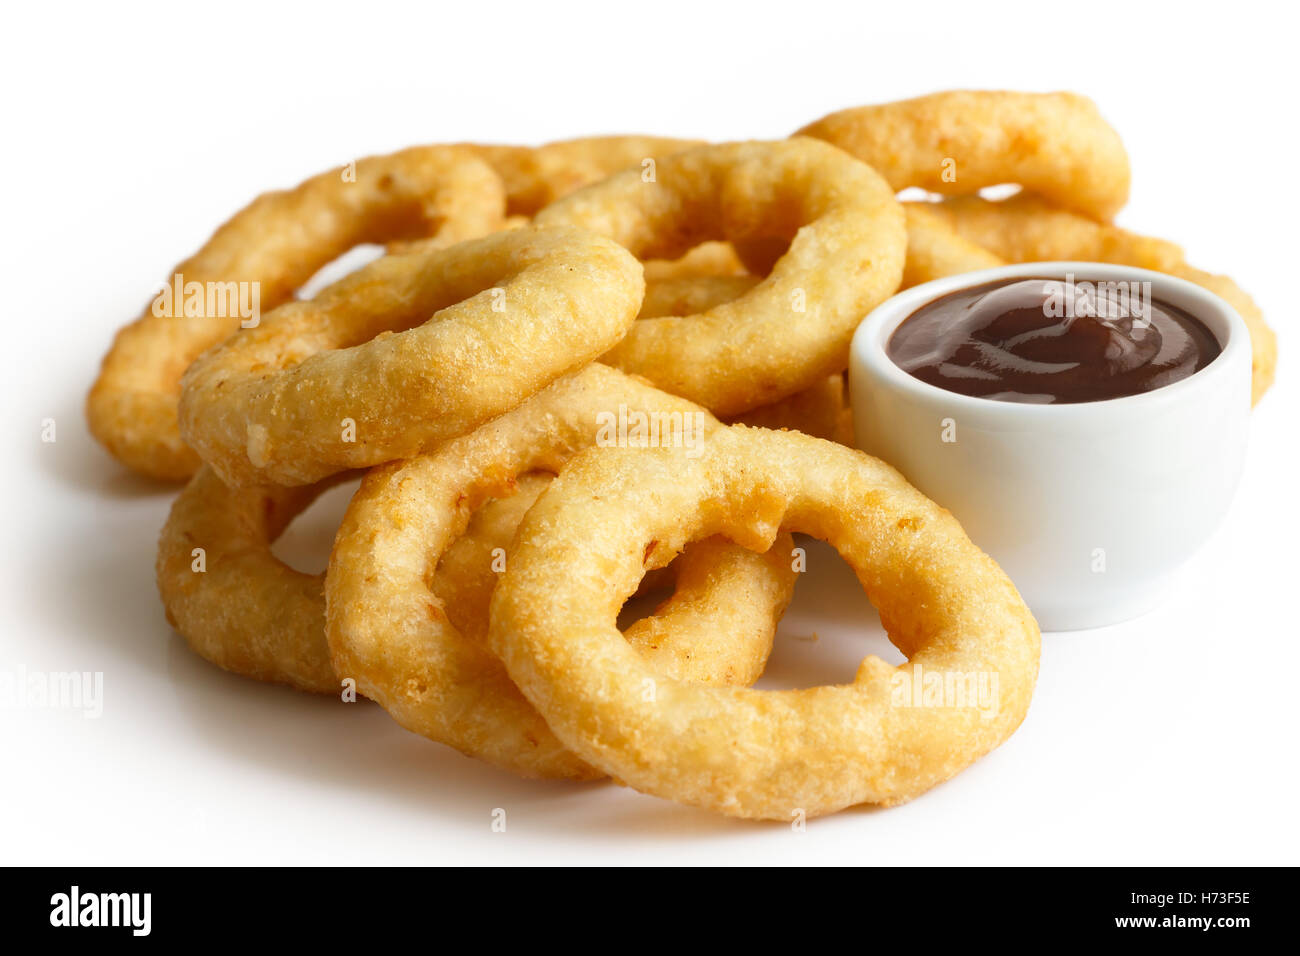 Heap of deep fried onion or calamari rings with barbecue dip isolated on white. Stock Photo